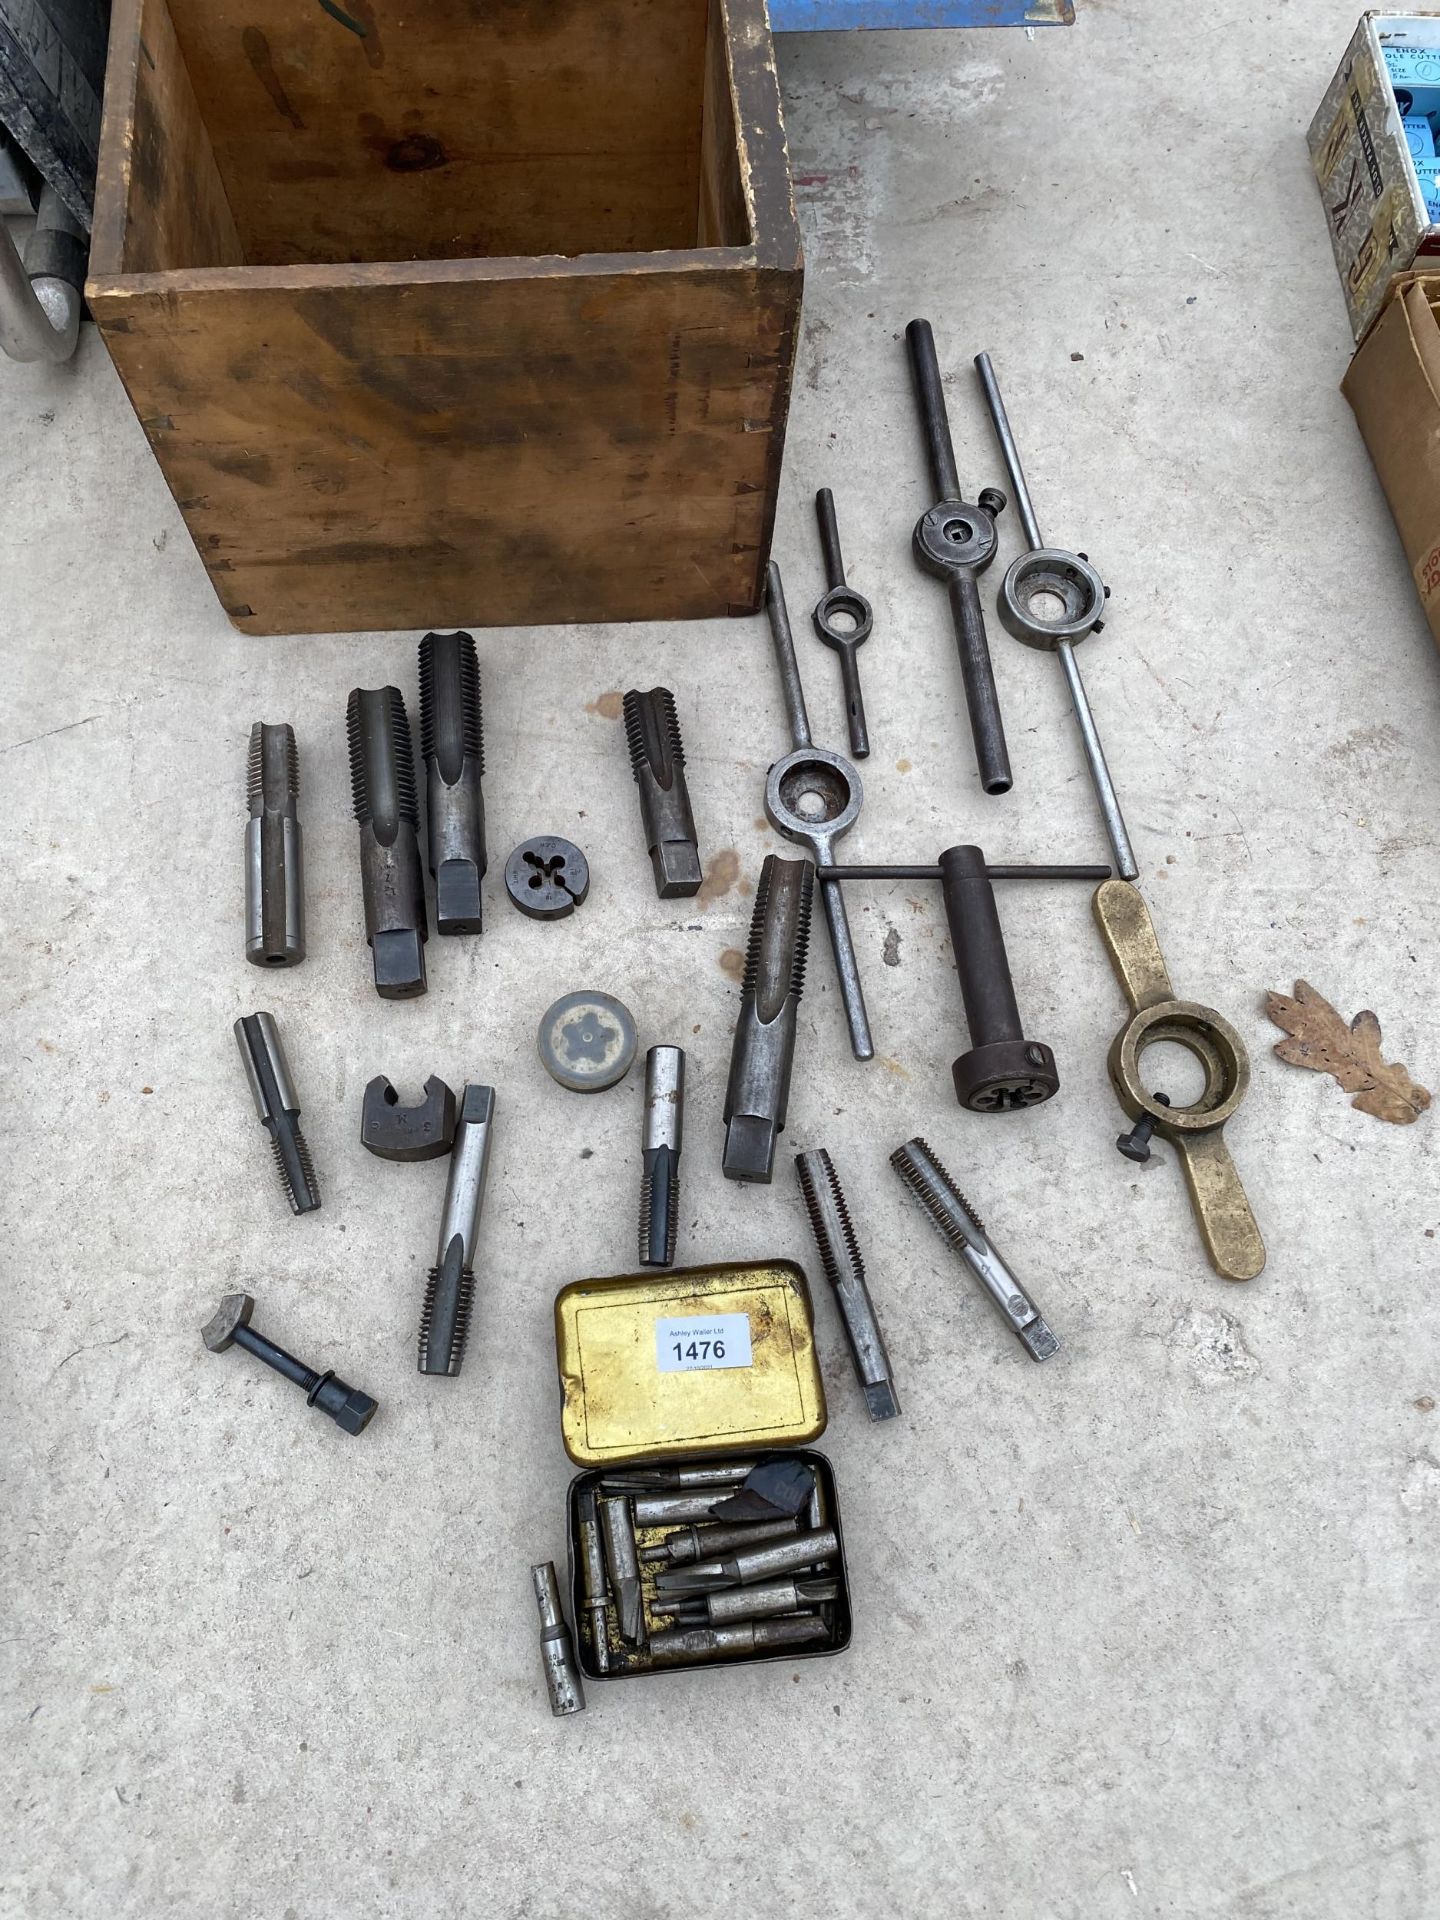 A LARGE QUANTITY OF TAP AND DIE BITS